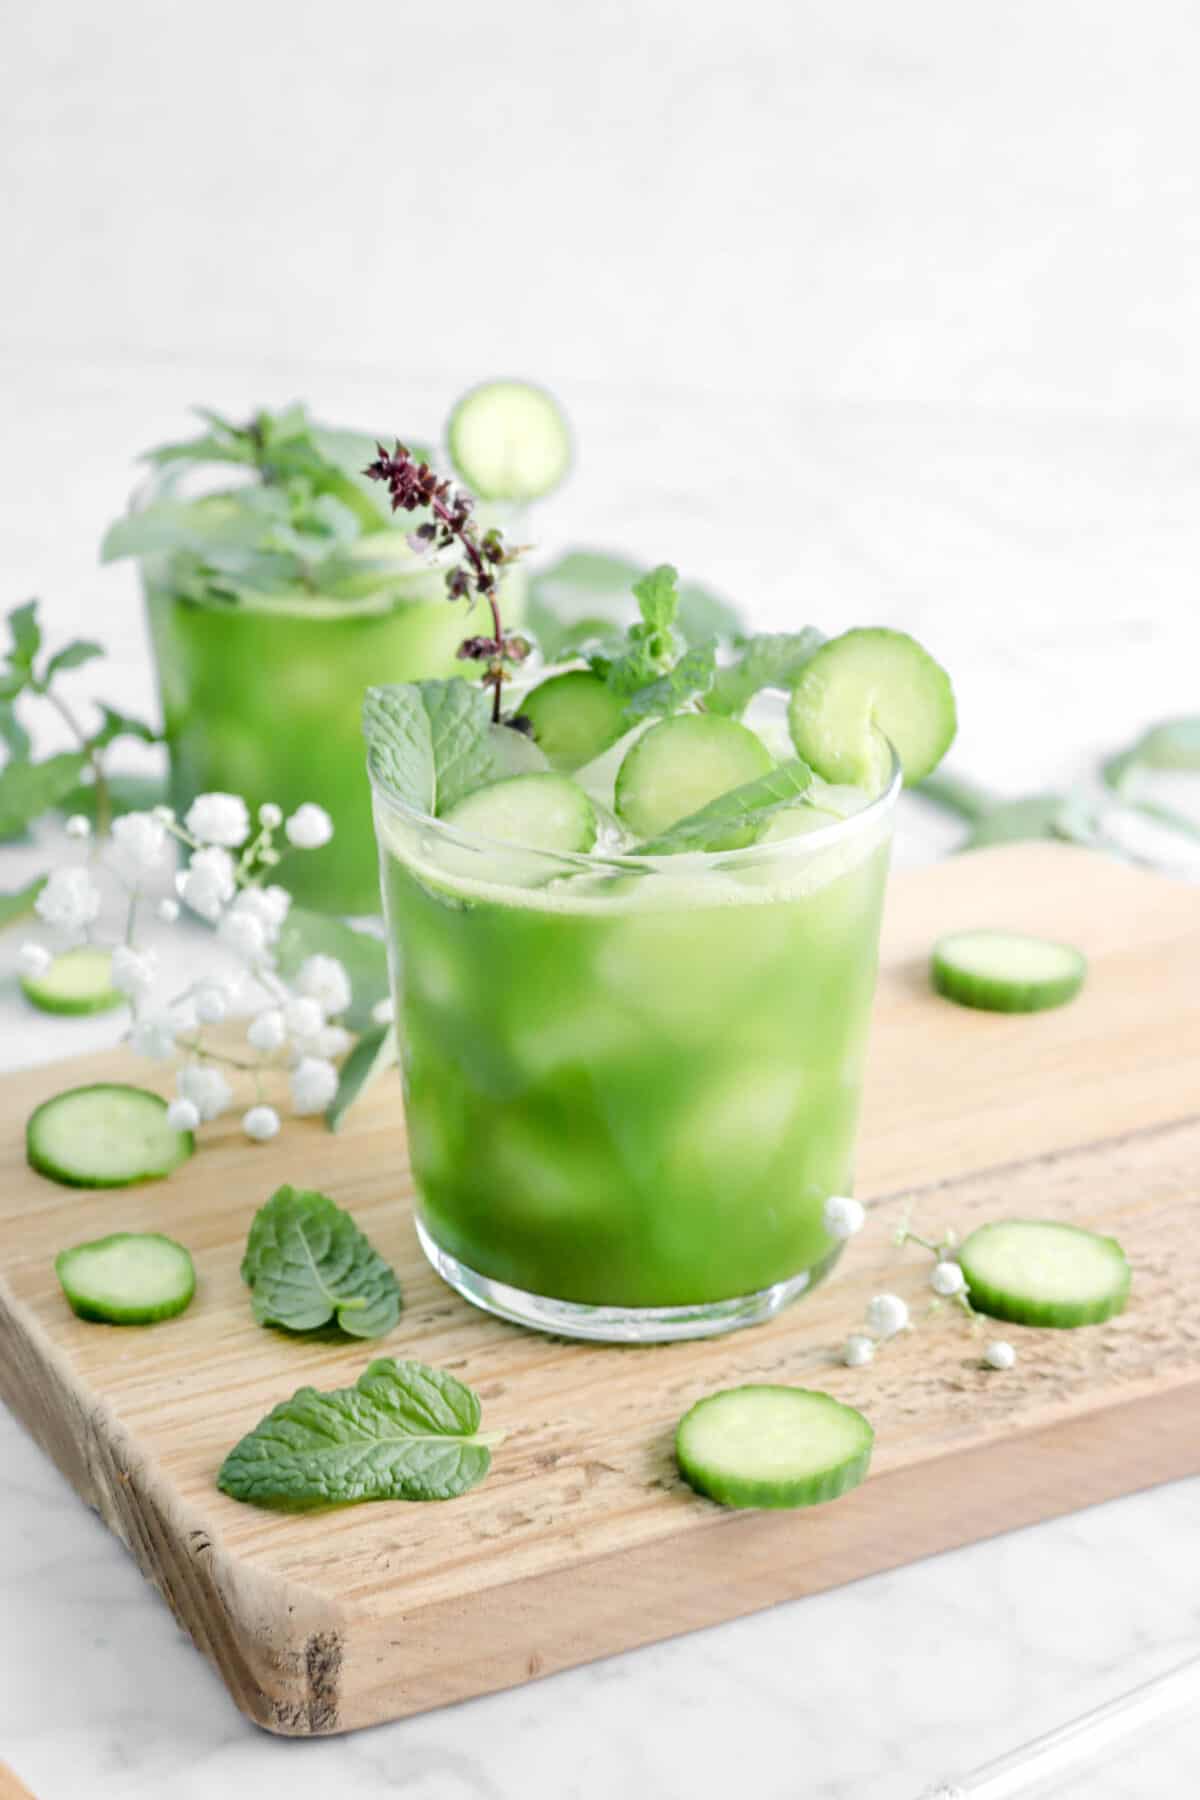 two glasses of green juice with cucumber slices, mint leaves, and flowers